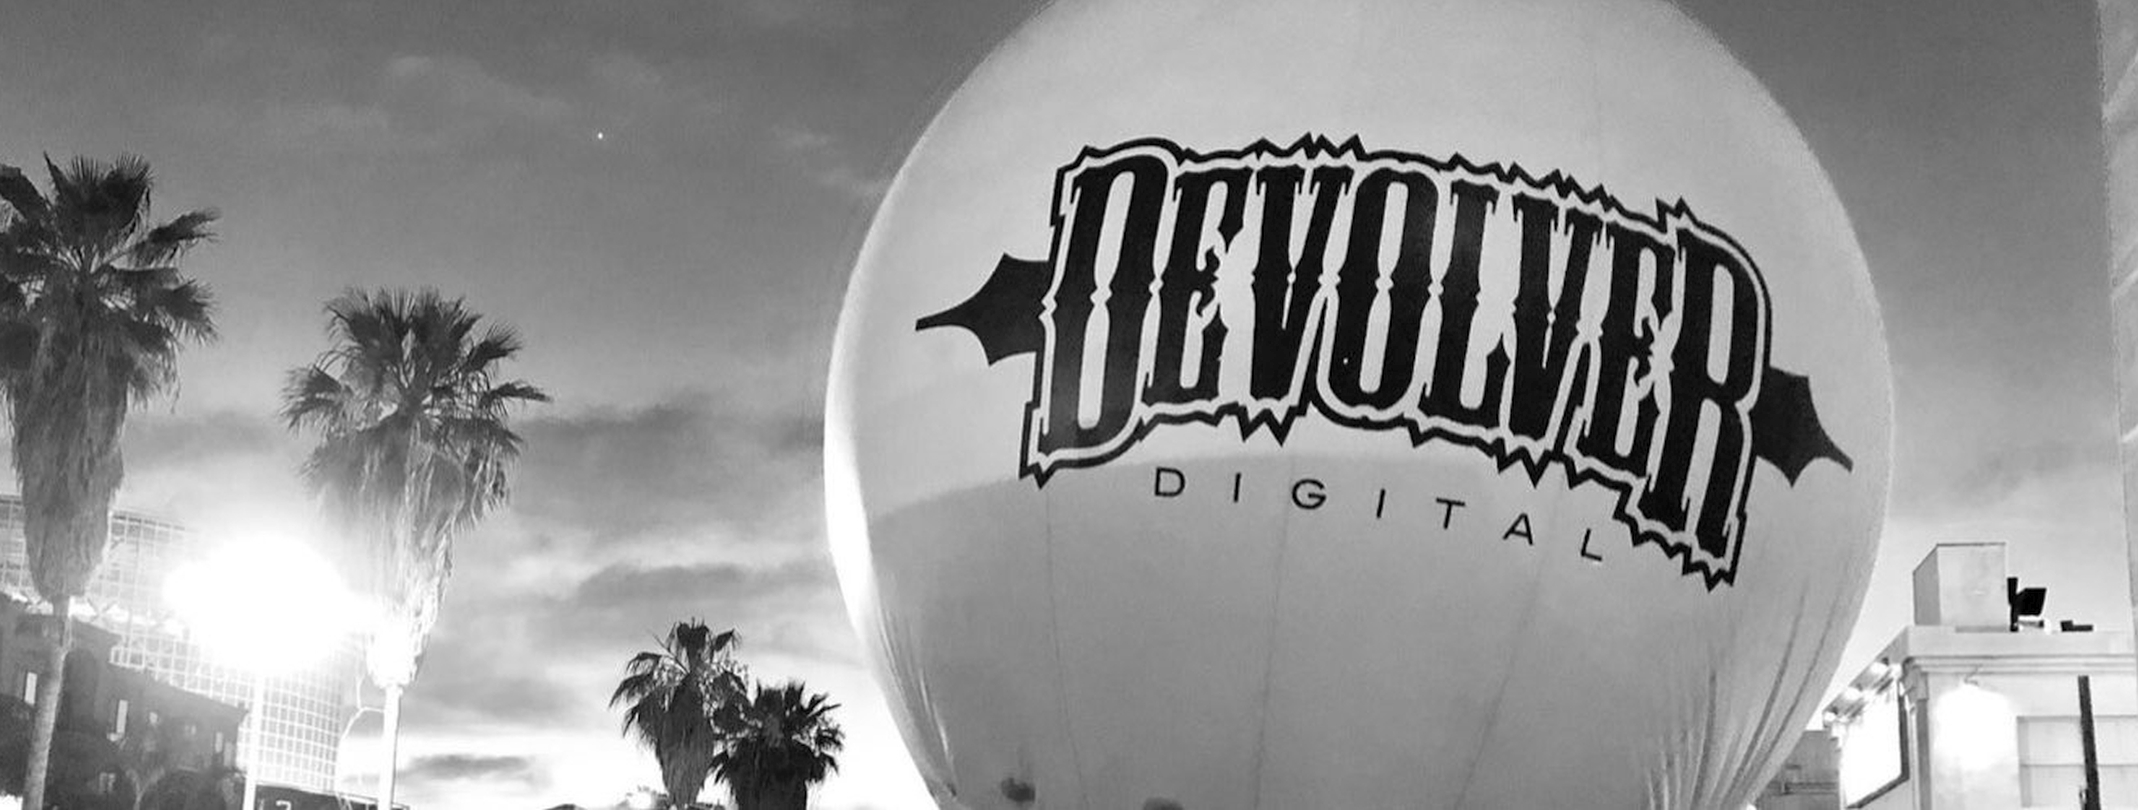 Devolver Digital Registers Japanese Twitter Account For Country Exclusive News